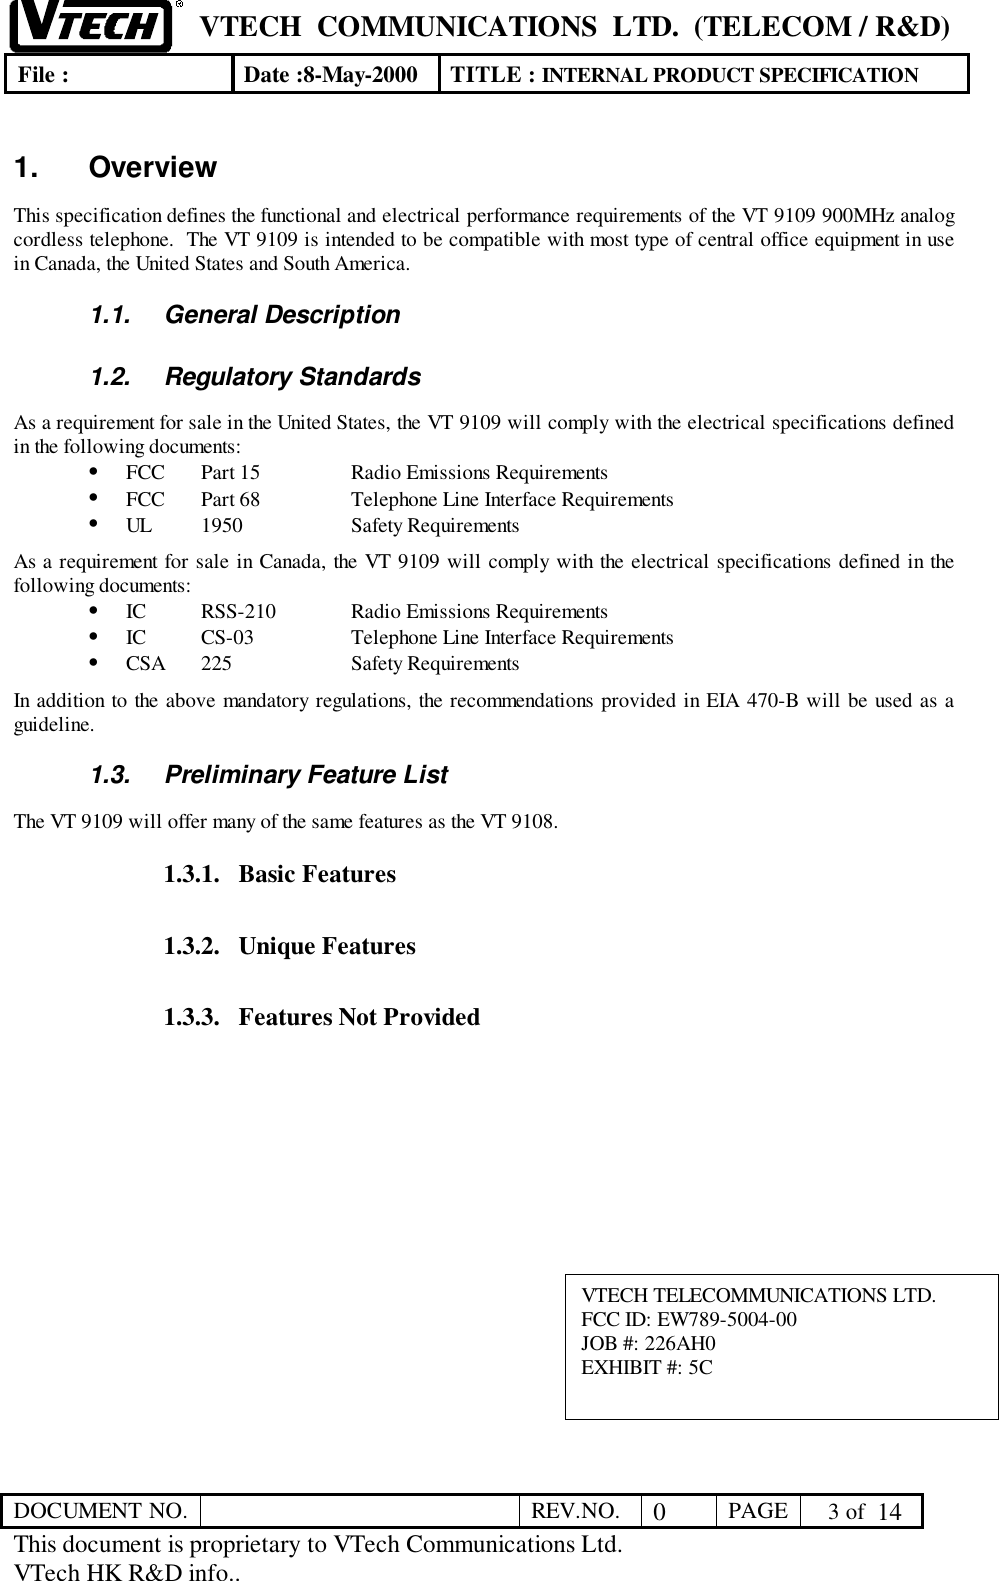 VTECH  COMMUNICATIONS  LTD.  (TELECOM / R&amp;D)File : Date :8-May-2000 TITLE : INTERNAL PRODUCT SPECIFICATIONDOCUMENT NO. REV.NO. 0PAGE  3 of  14This document is proprietary to VTech Communications Ltd.VTech HK R&amp;D info..1. OverviewThis specification defines the functional and electrical performance requirements of the VT 9109 900MHz analogcordless telephone.  The VT 9109 is intended to be compatible with most type of central office equipment in usein Canada, the United States and South America.1.1. General Description1.2. Regulatory StandardsAs a requirement for sale in the United States, the VT 9109 will comply with the electrical specifications definedin the following documents:• FCC Part 15 Radio Emissions Requirements• FCC Part 68 Telephone Line Interface Requirements• UL 1950 Safety RequirementsAs a requirement for sale in Canada, the VT 9109 will comply with the electrical specifications defined in thefollowing documents:• IC RSS-210 Radio Emissions Requirements• IC CS-03 Telephone Line Interface Requirements• CSA 225 Safety RequirementsIn addition to the above mandatory regulations, the recommendations provided in EIA 470-B will be used as aguideline.1.3.  Preliminary Feature ListThe VT 9109 will offer many of the same features as the VT 9108.1.3.1. Basic Features1.3.2. Unique Features1.3.3. Features Not ProvidedVTECH TELECOMMUNICATIONS LTD.FCC ID: EW789-5004-00JOB #: 226AH0EXHIBIT #: 5C